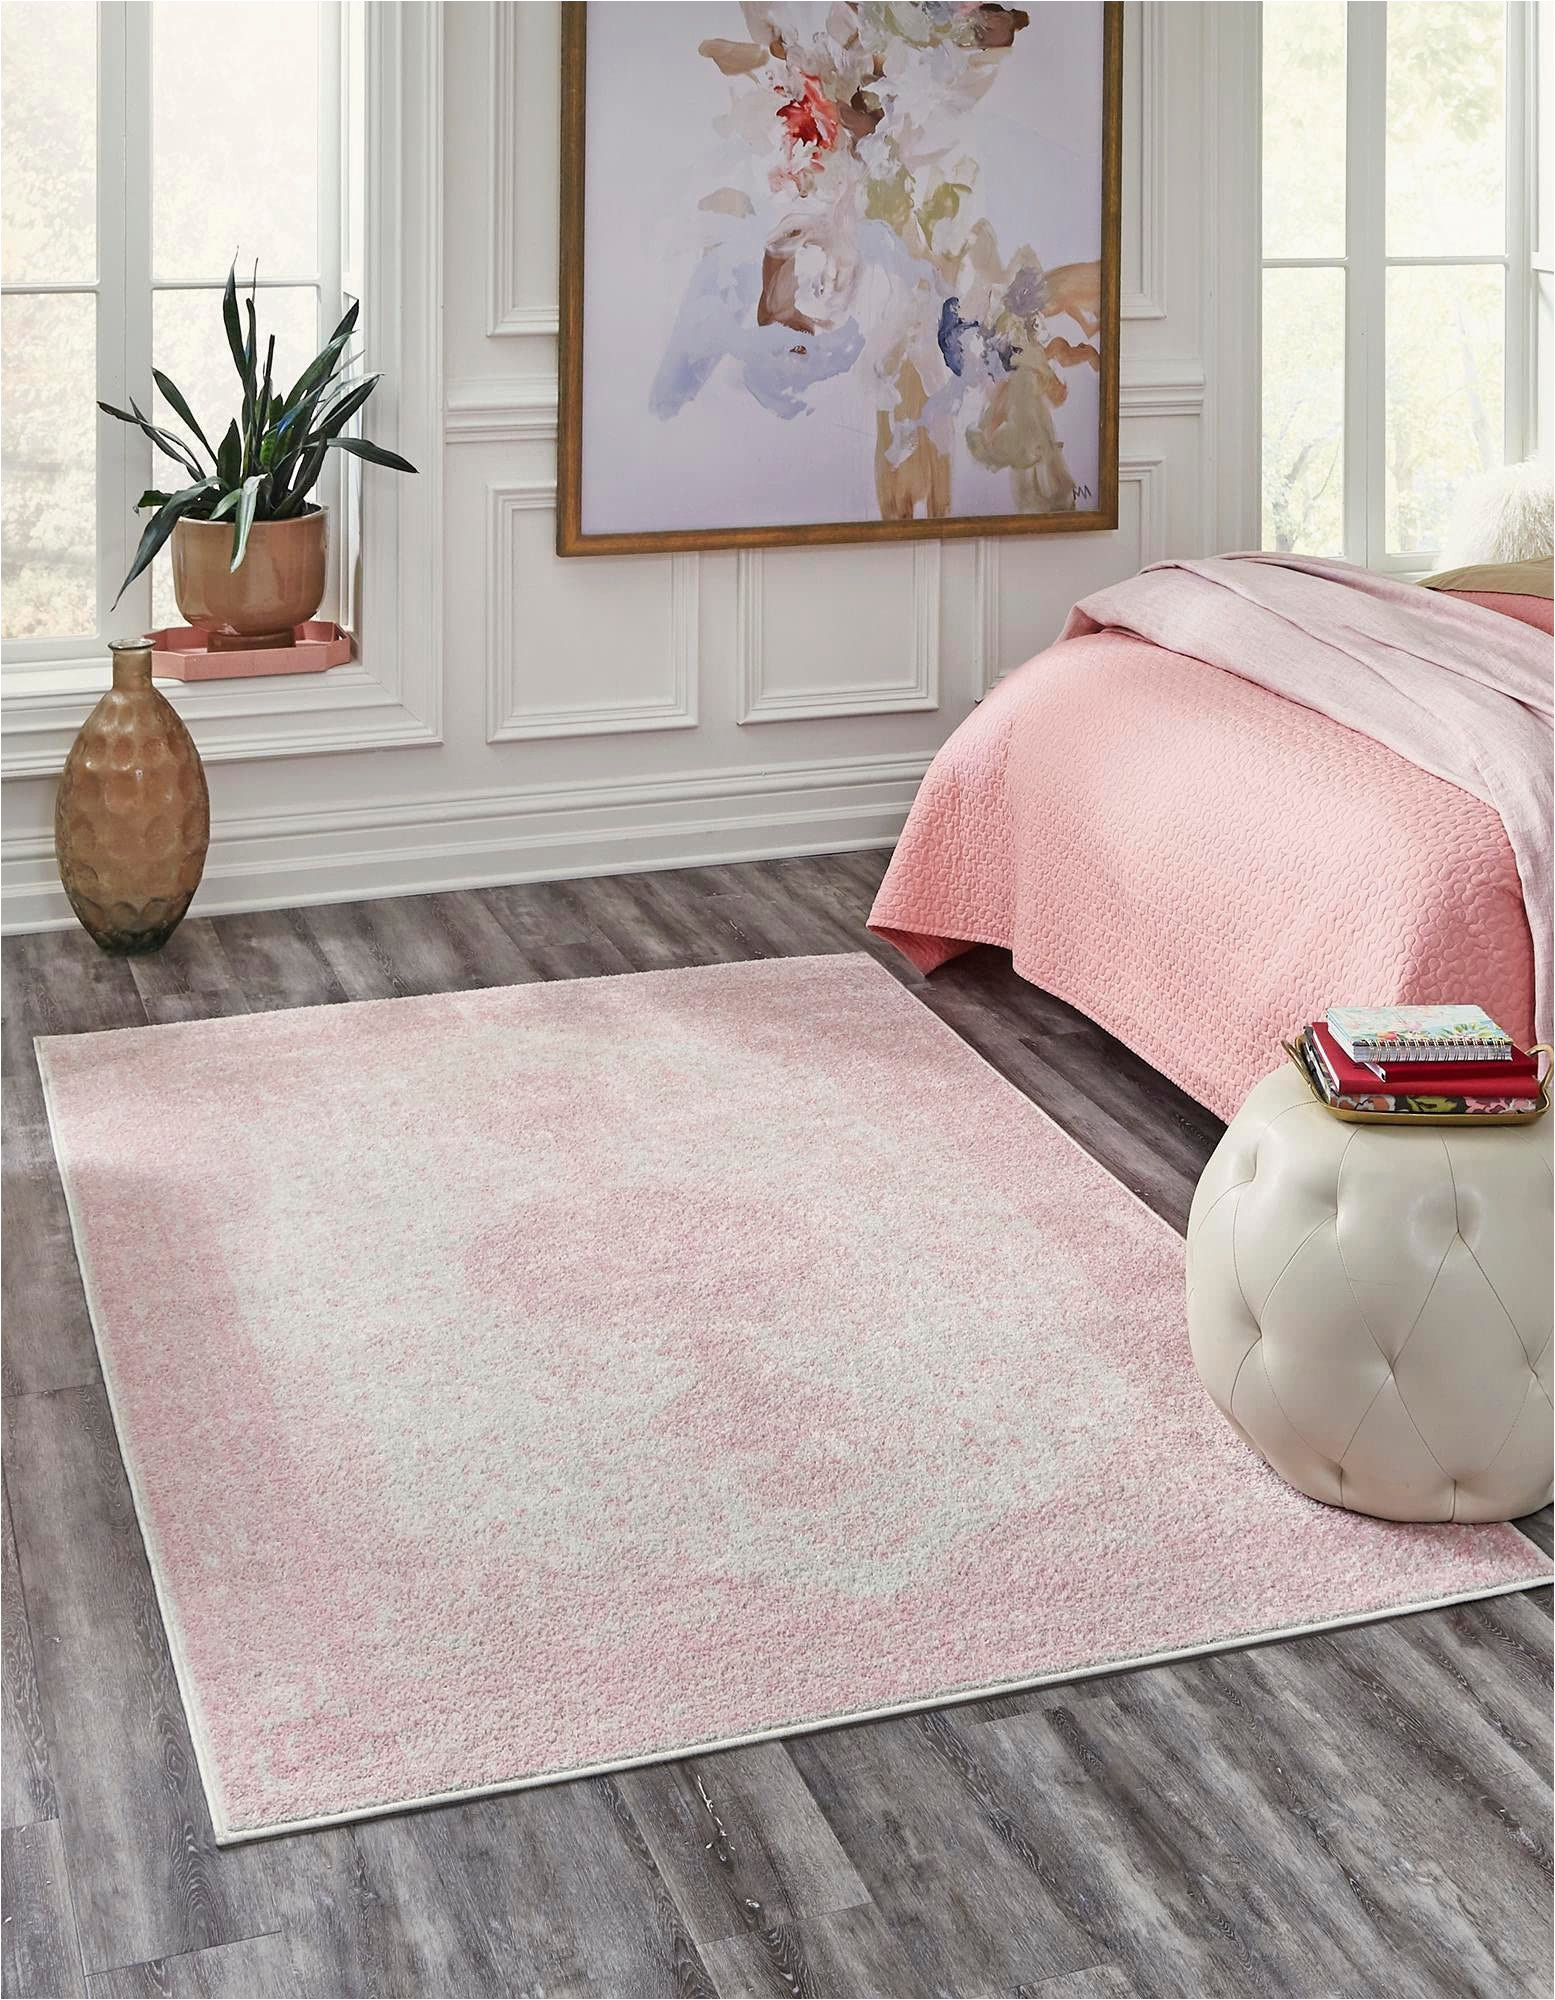 Pink area Rug 5 X 8 Rugs.com Dover Collection Rug â 5′ X 8′ Pink Low-pile Rug Perfect for Bedrooms, Dining Rooms, Living Rooms